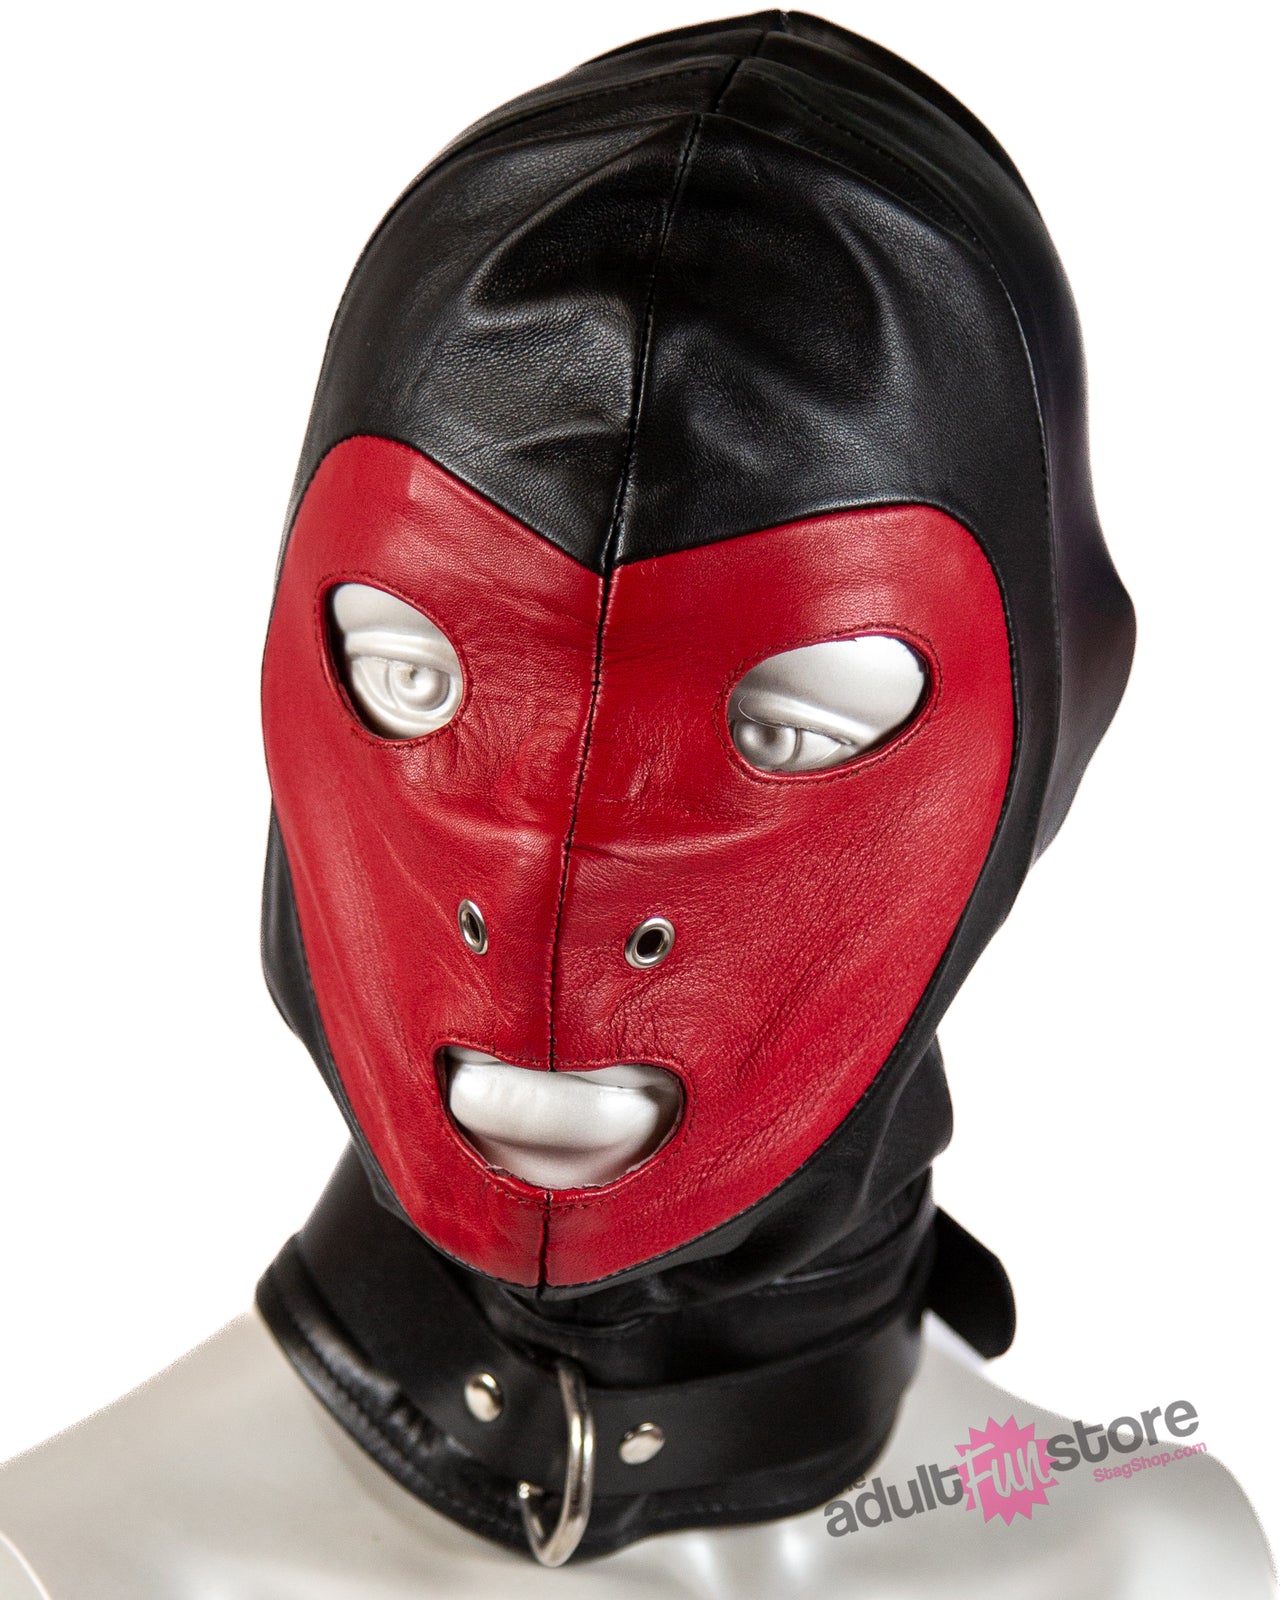 Rouge Garments - Leather Pad-lockable Mask with D-Ring & Lace up Back - Black/Red - Stag Shop